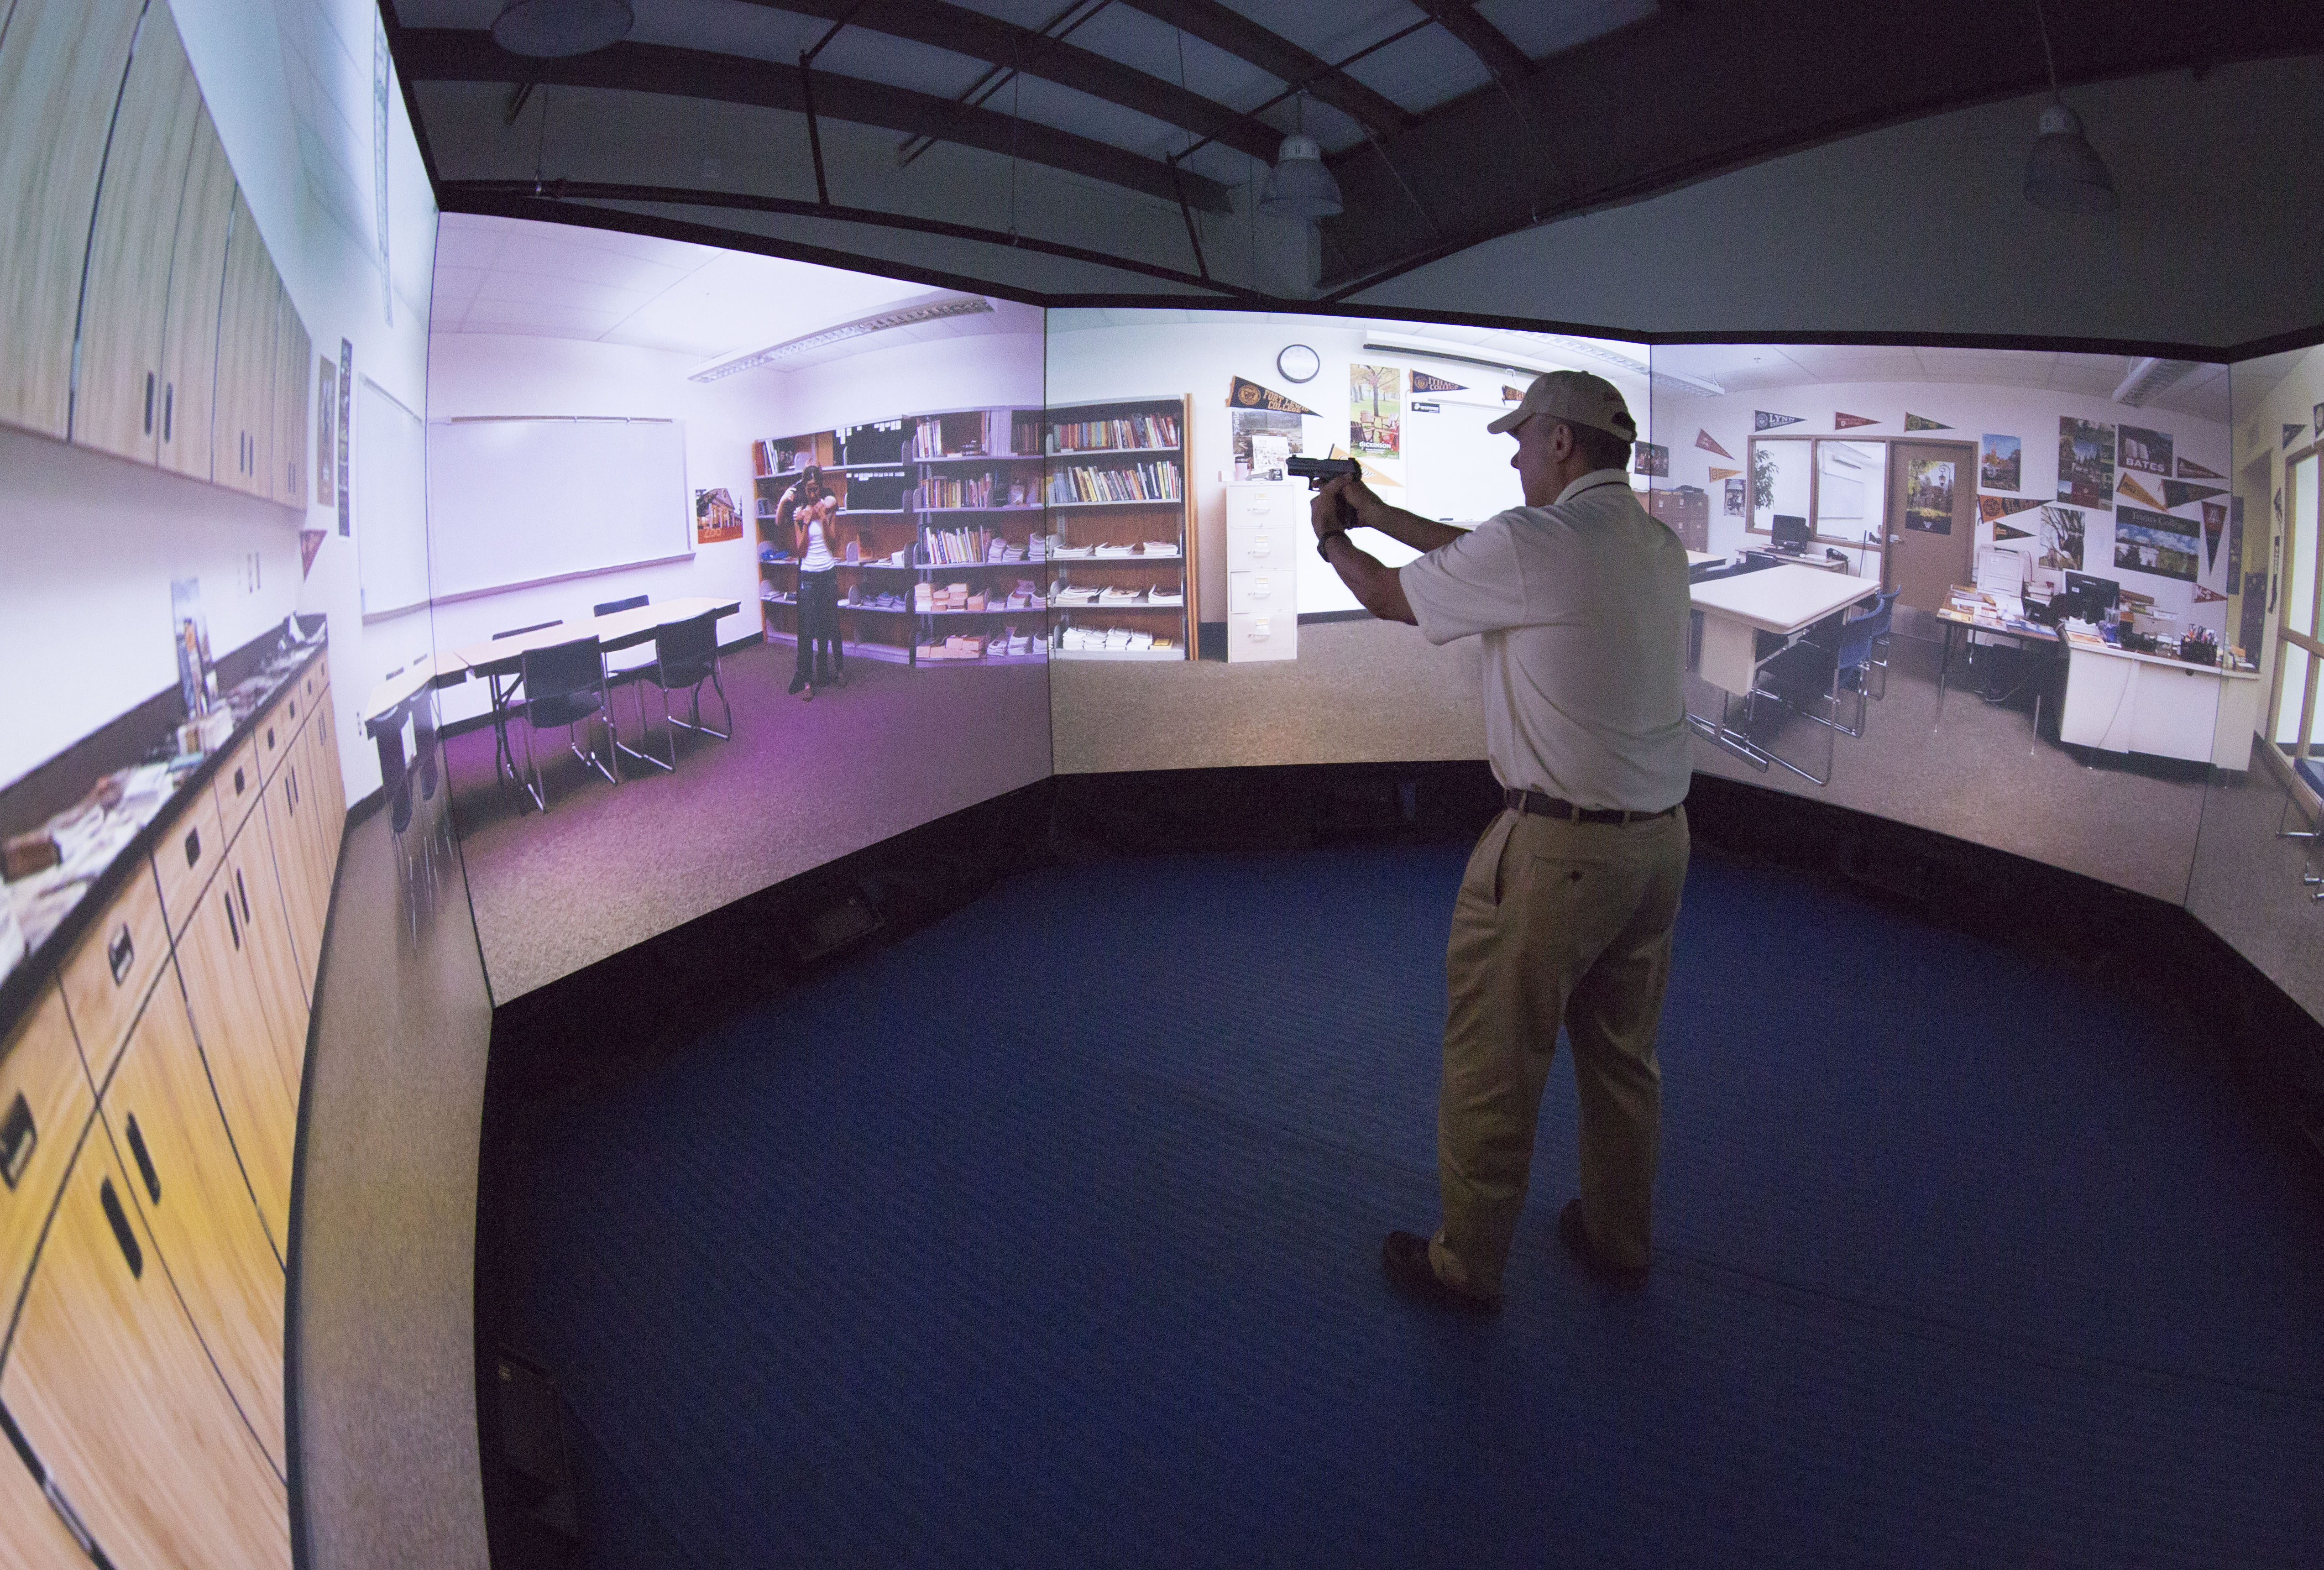 At CBP’s Advanced Training Center in Harpers Ferry, West Virginia, Commissioner Kerlikowske gives his best shot in the virtual training simulator in August.